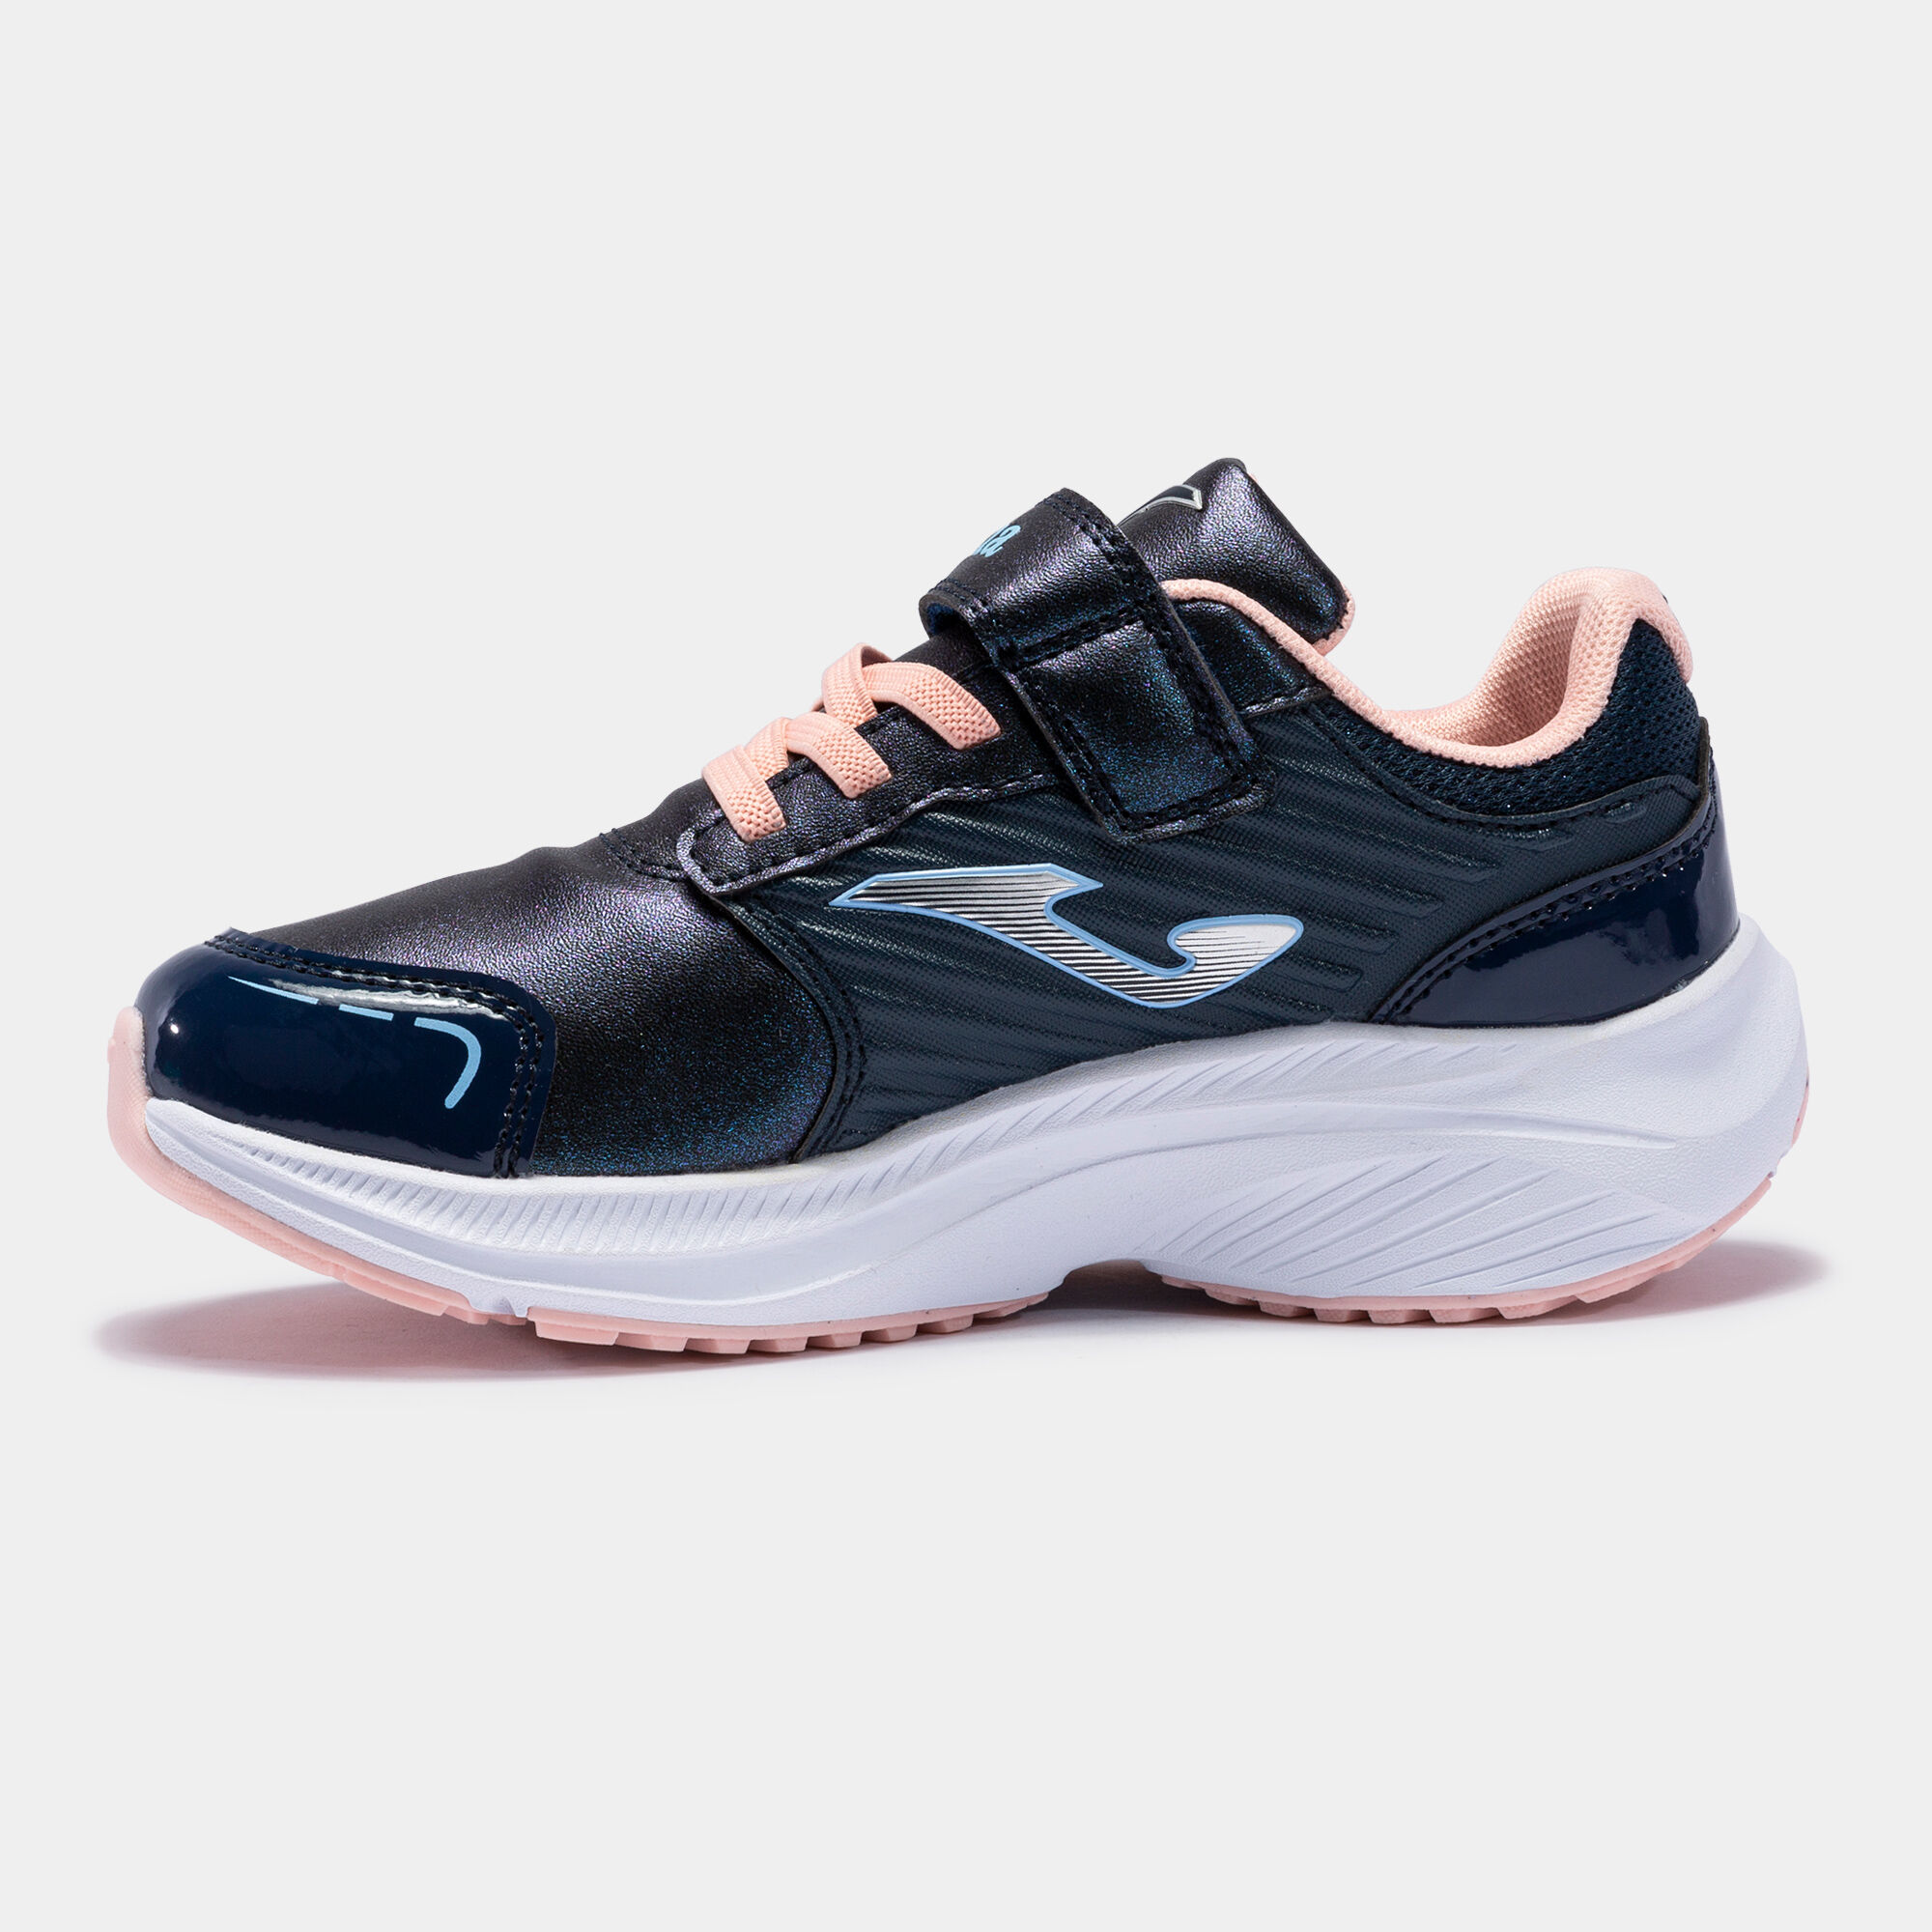 CASUAL SHOES FURY 22 JUNIOR NAVY BLUE PINK